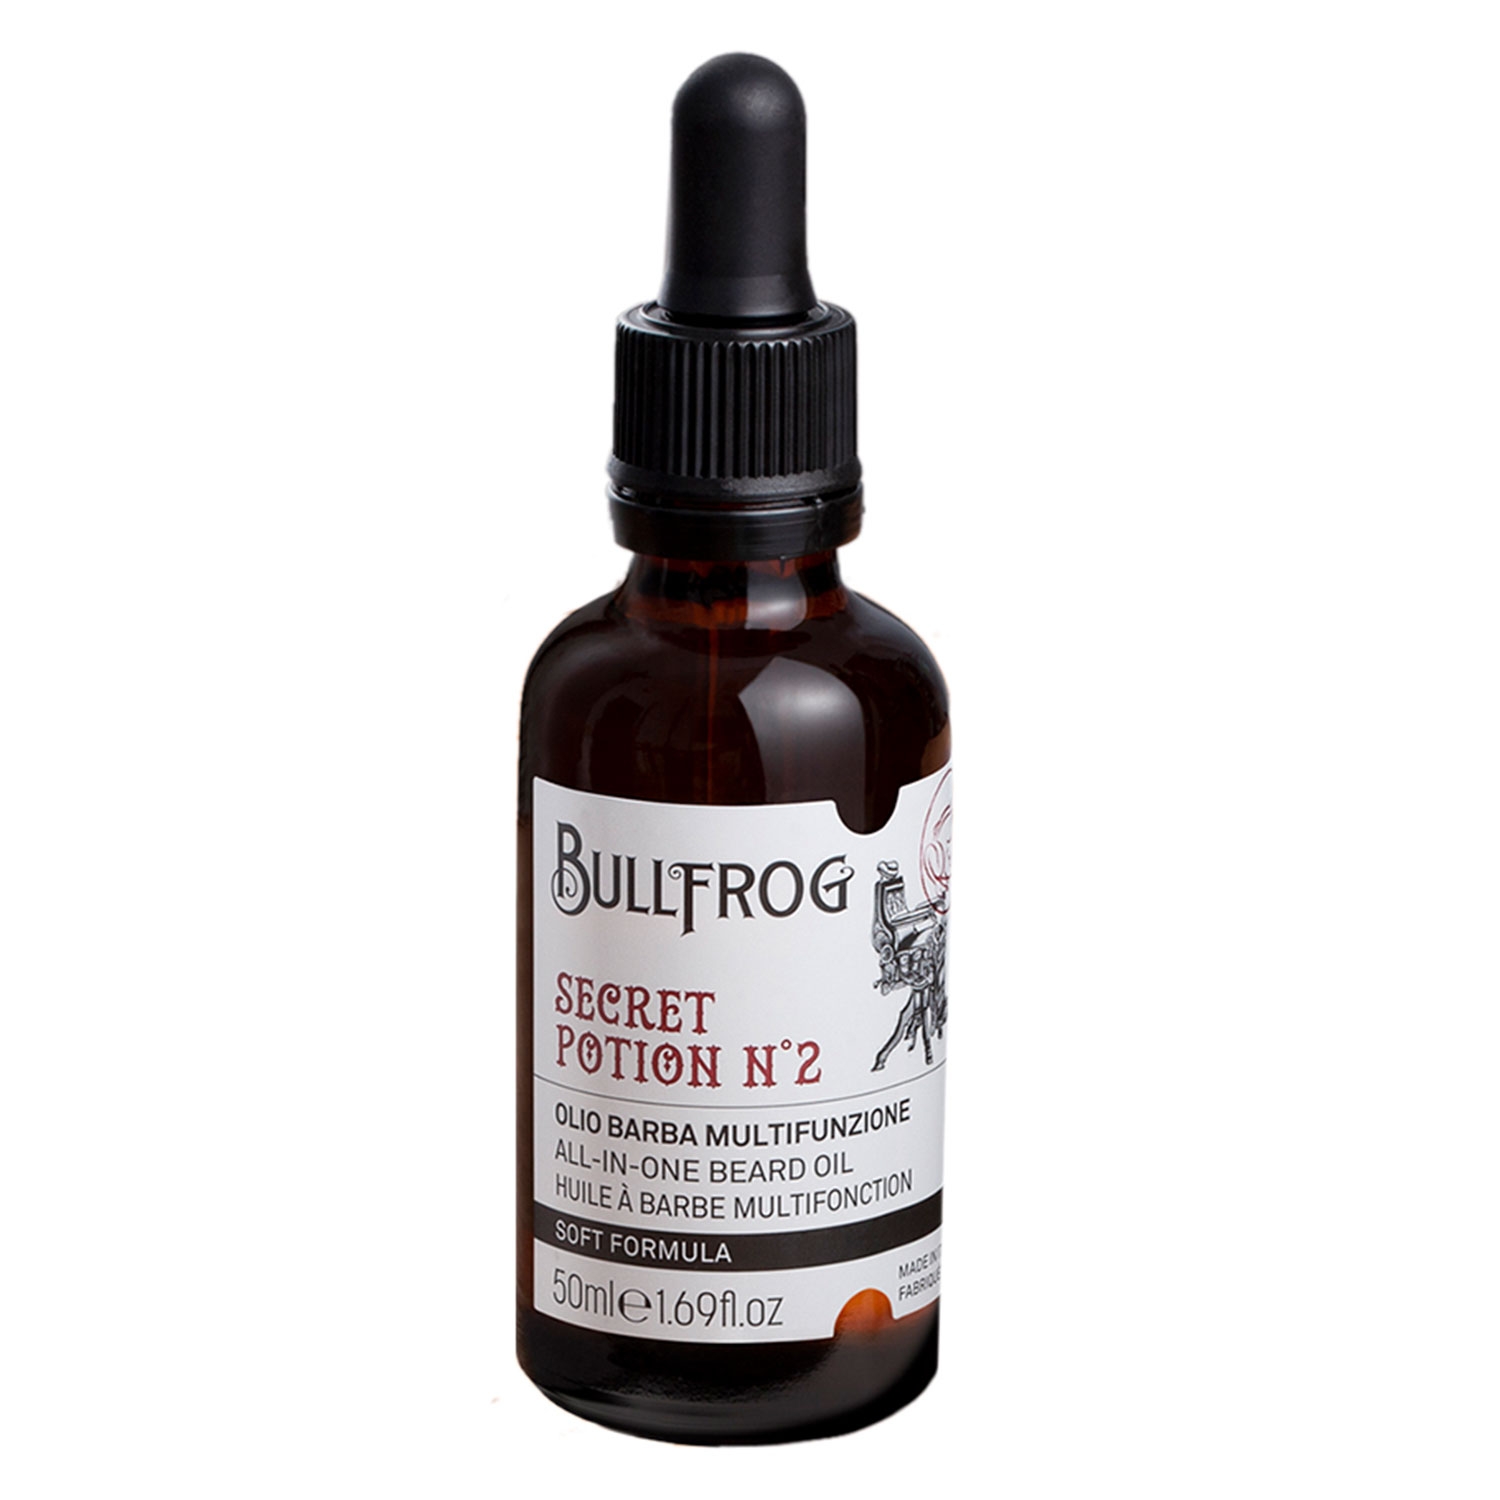 Product image from BULLFROG - All-in-One Beard Oil Secret Potion N°2